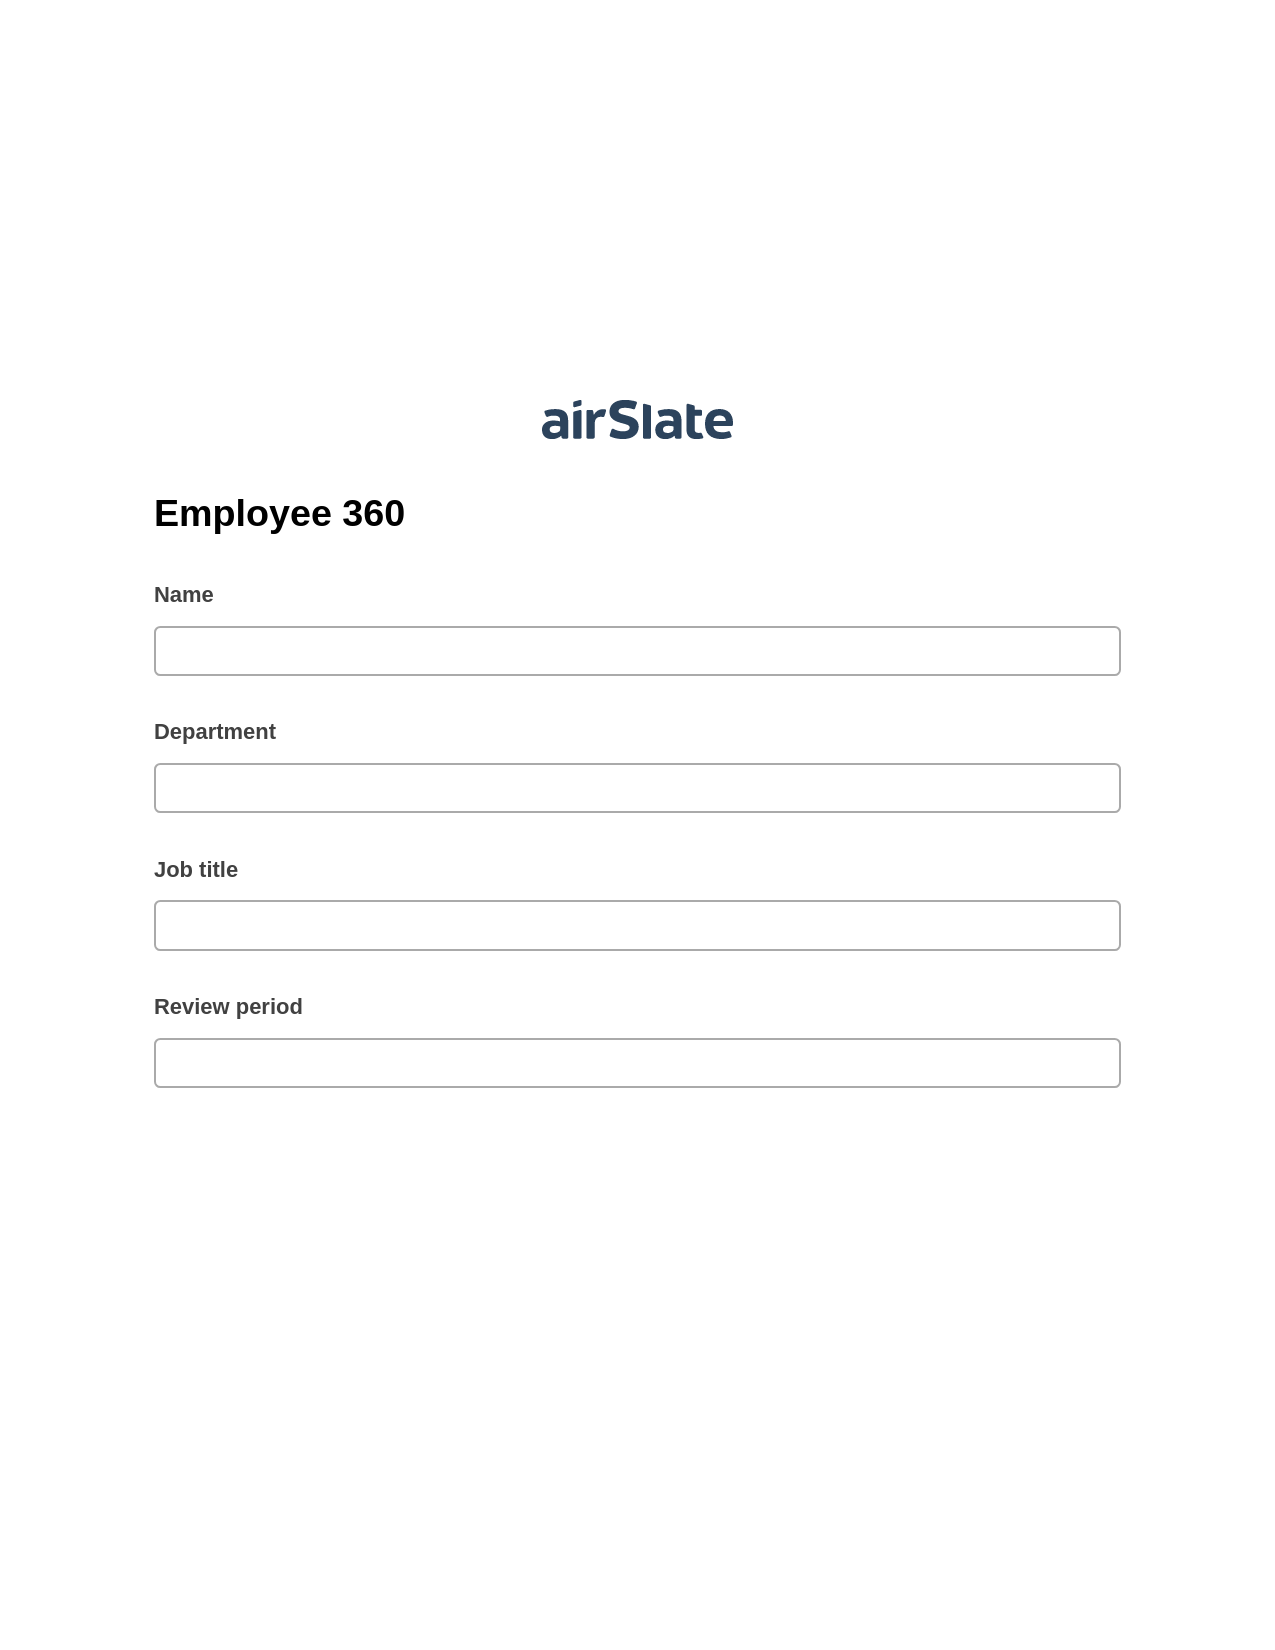 Multirole Employee 360 Pre-fill from MS Dynamics 365 Records, Jira Bot, Archive to Google Drive Bot